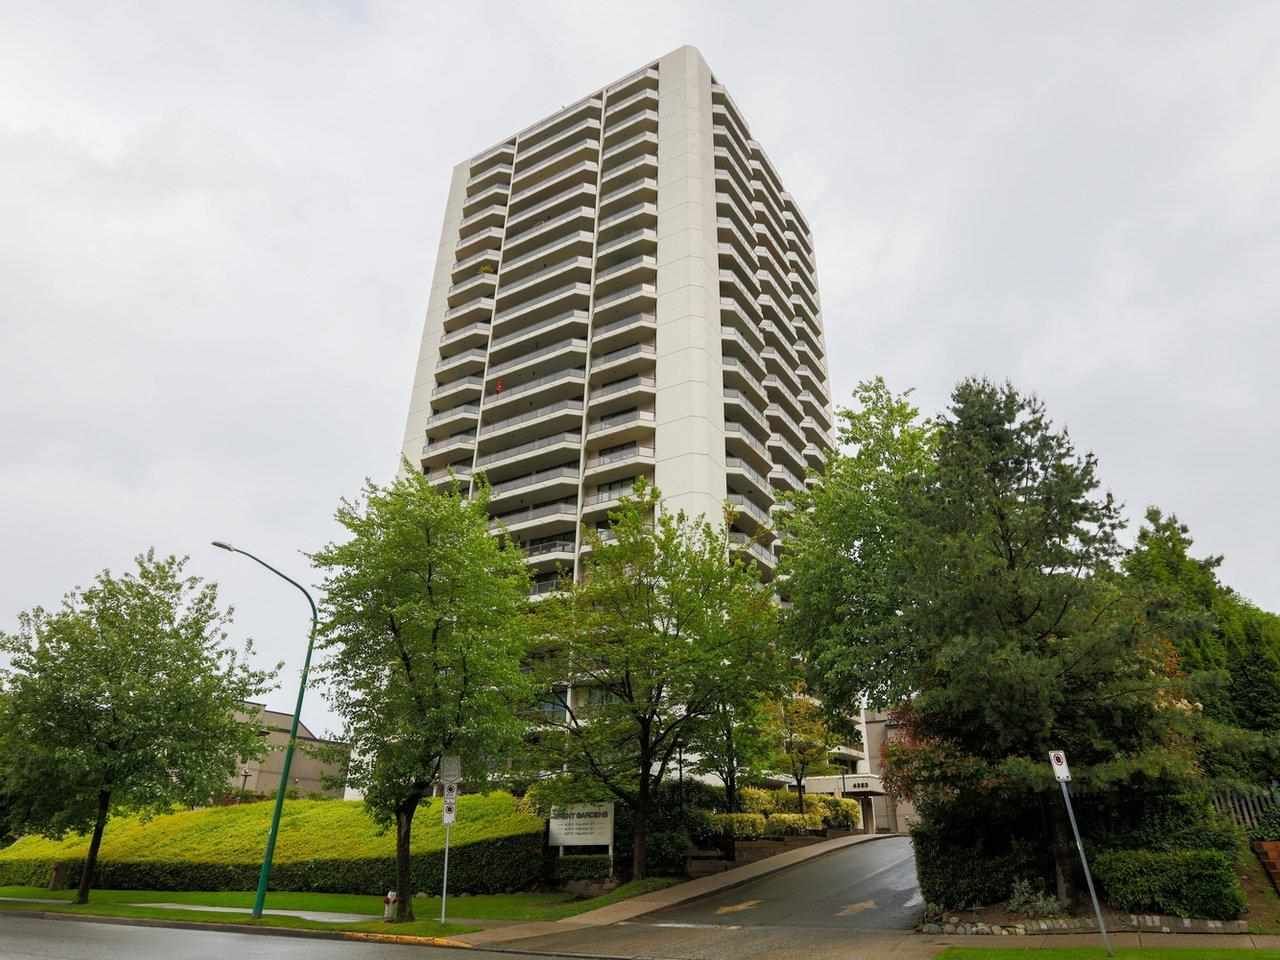 Main Photo: 707 4353 HALIFAX Street in Burnaby: Brentwood Park Condo for sale (Burnaby North)  : MLS®# R2585533